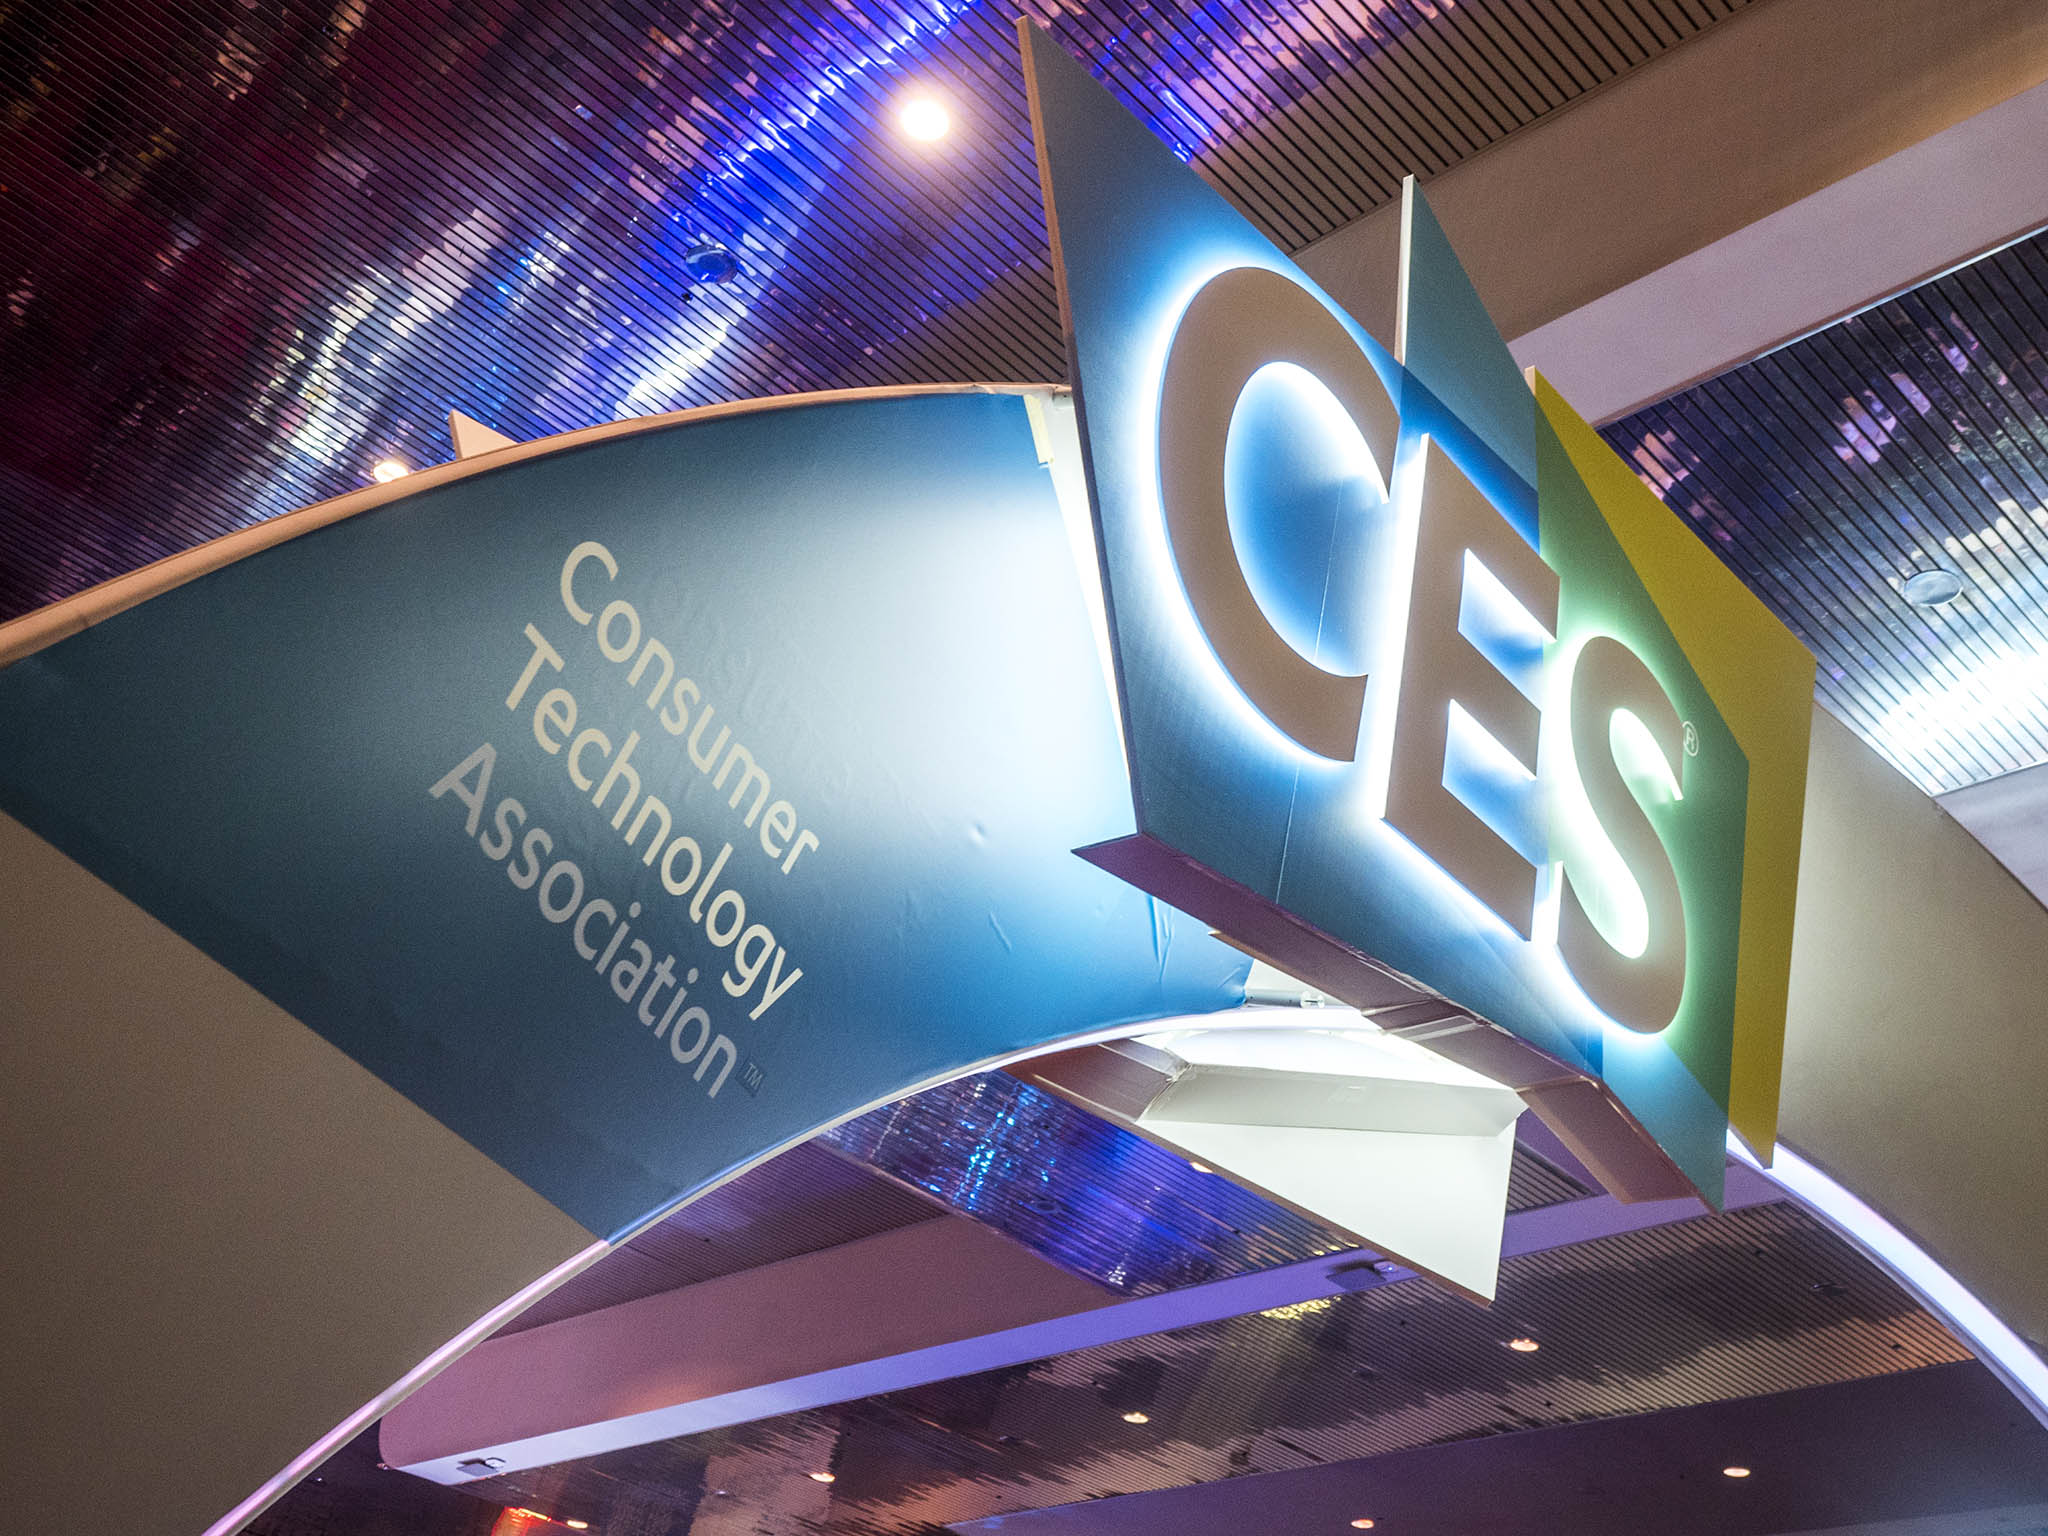 Our readers let us know if they think CES 2022 should be cancelled